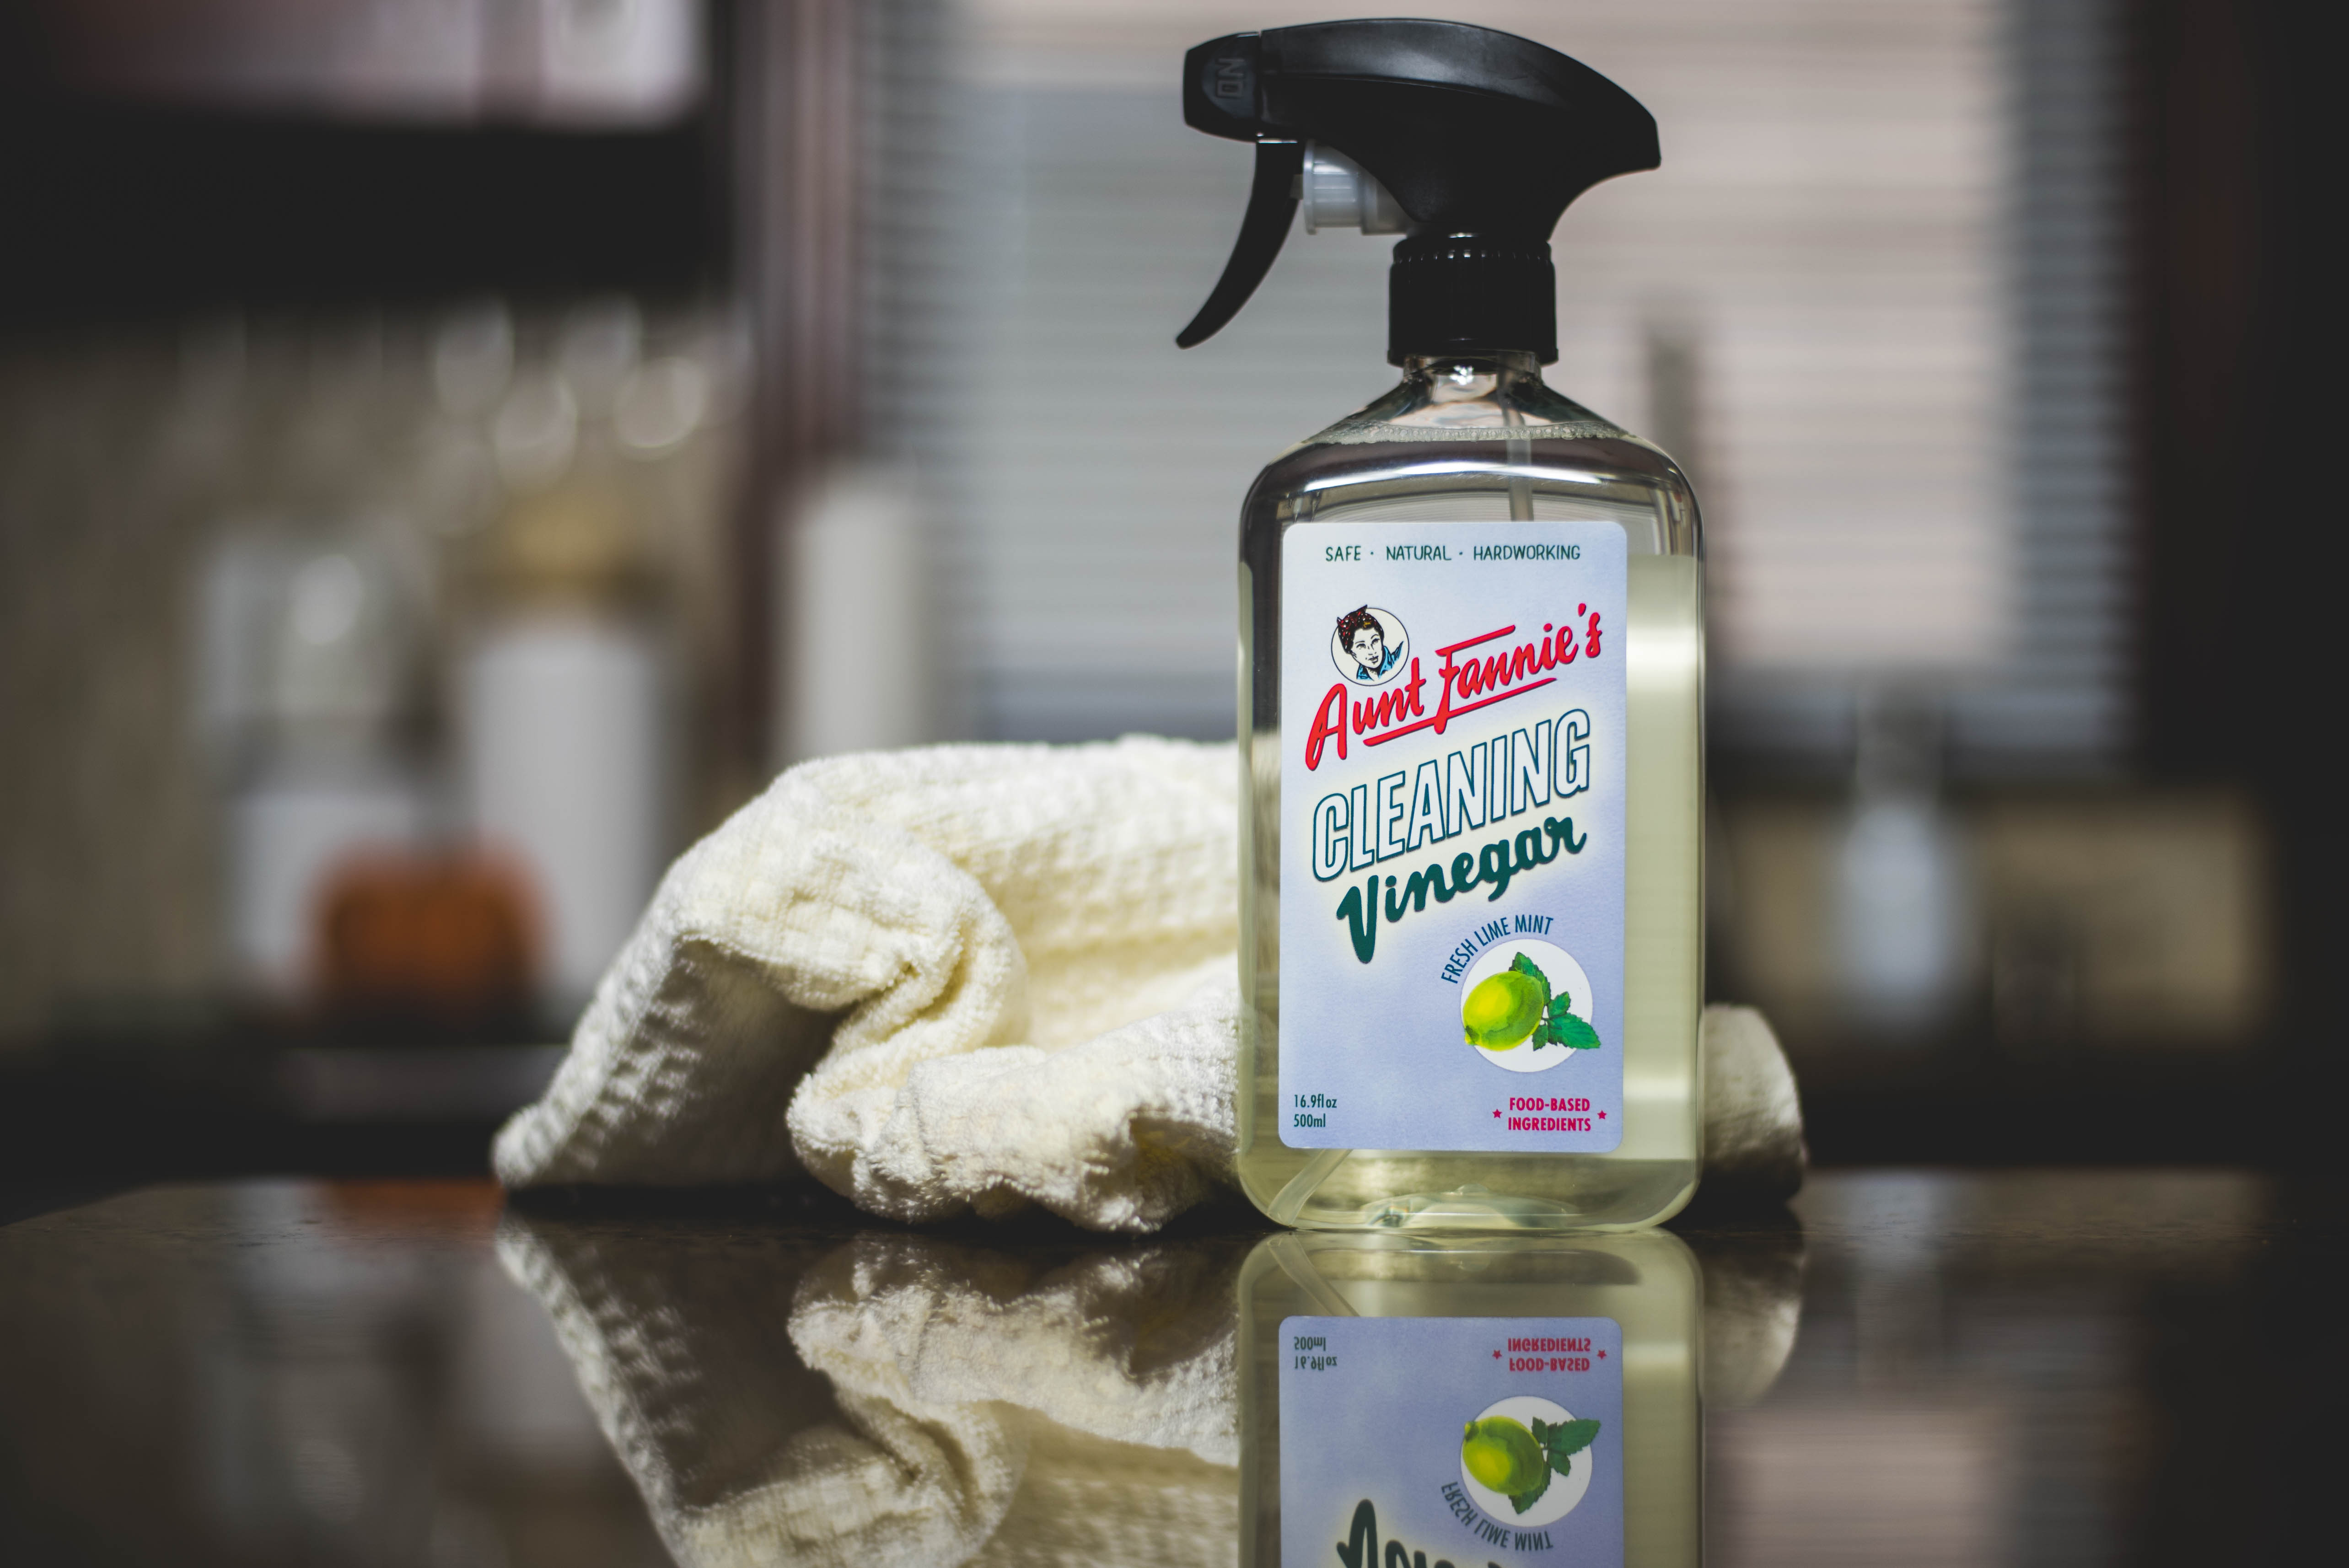 aunt fannie's #HomeSweetBiome #HealthierHousekeeping #PlantBased #NaturalCleaning